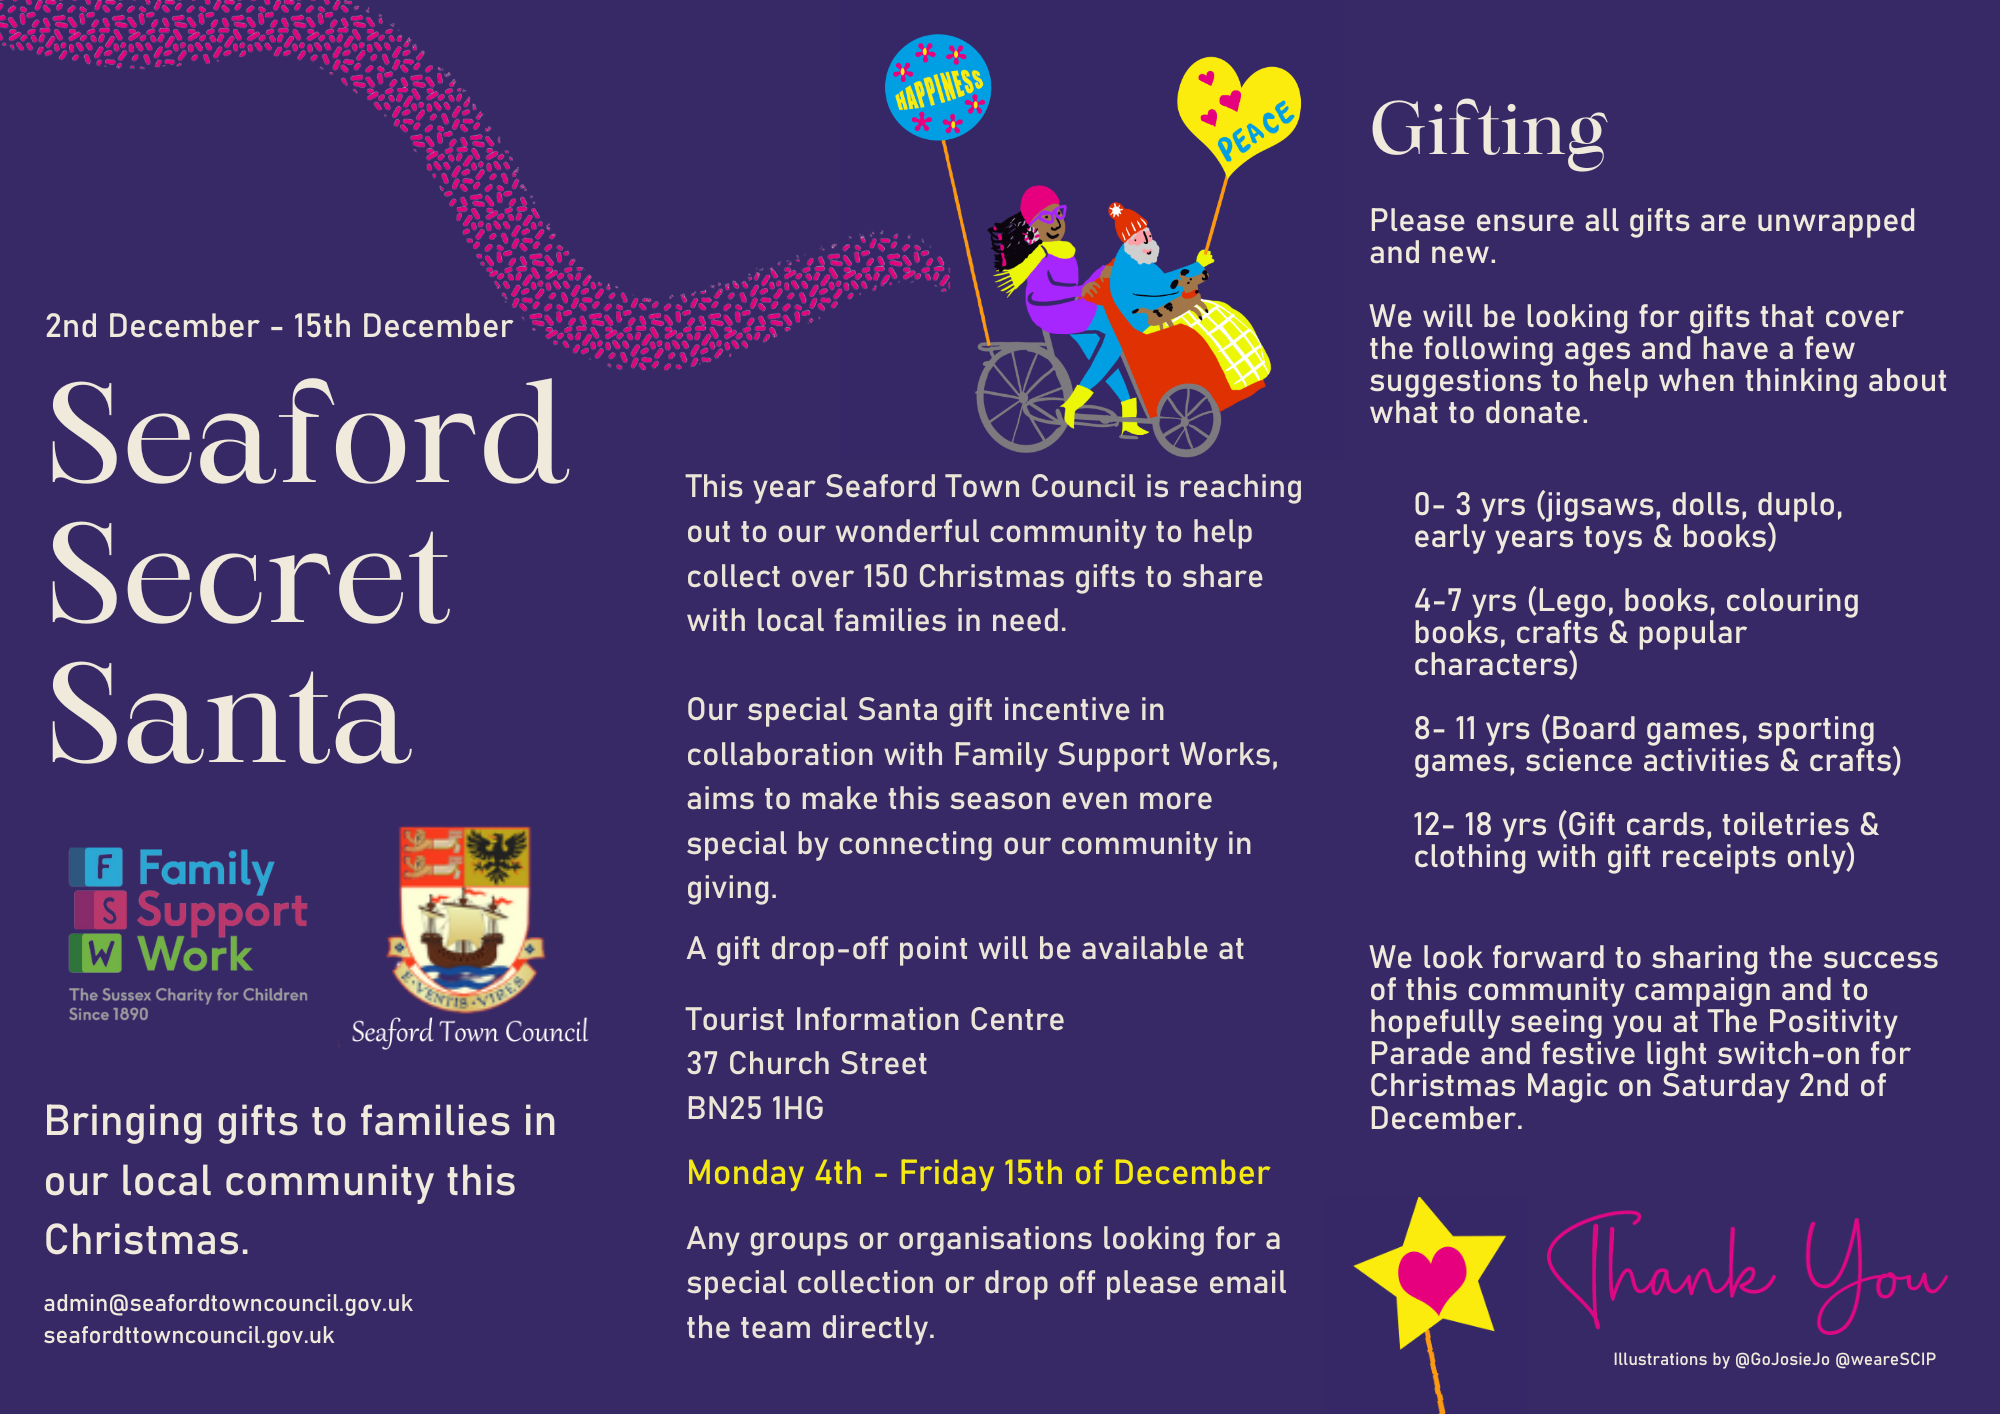 Poster with the following information: This year Seaford Town Council is reaching out to our wonderful community to help collect over 150 Christmas gifts to share with local families in need. Our special Santa gift incentive in collaboration with Family Support Works, aims to make this season even more special by connecting our community in giving. A gift drop-off point will be available at Seaford Tourist Information Centre. Any groups or organisations looking for a special collection or drop off please email the team directly. Gifting: Please ensure all gifts are unwrapped and new. We will be looking for gifts that cover the following ages and have a few suggestions to help when thinking about what to donate. 0-3 yrs (jigsaws, dolls, duplo, early years toys & books) 4-7 yrs (Lego, books, colouring books, crafts & popular characters) 8- 11 yrs (Board games, sporting games, science activities & crafts) 12-18 yrs (Gift cards, toiletries & clothing with gift receipts only) We look forward to sharing the success of this community campaign and to hopefully seeing you at The Positivity Parade and festive light switch-on for Christmas Magic on Saturday 2nd of December.